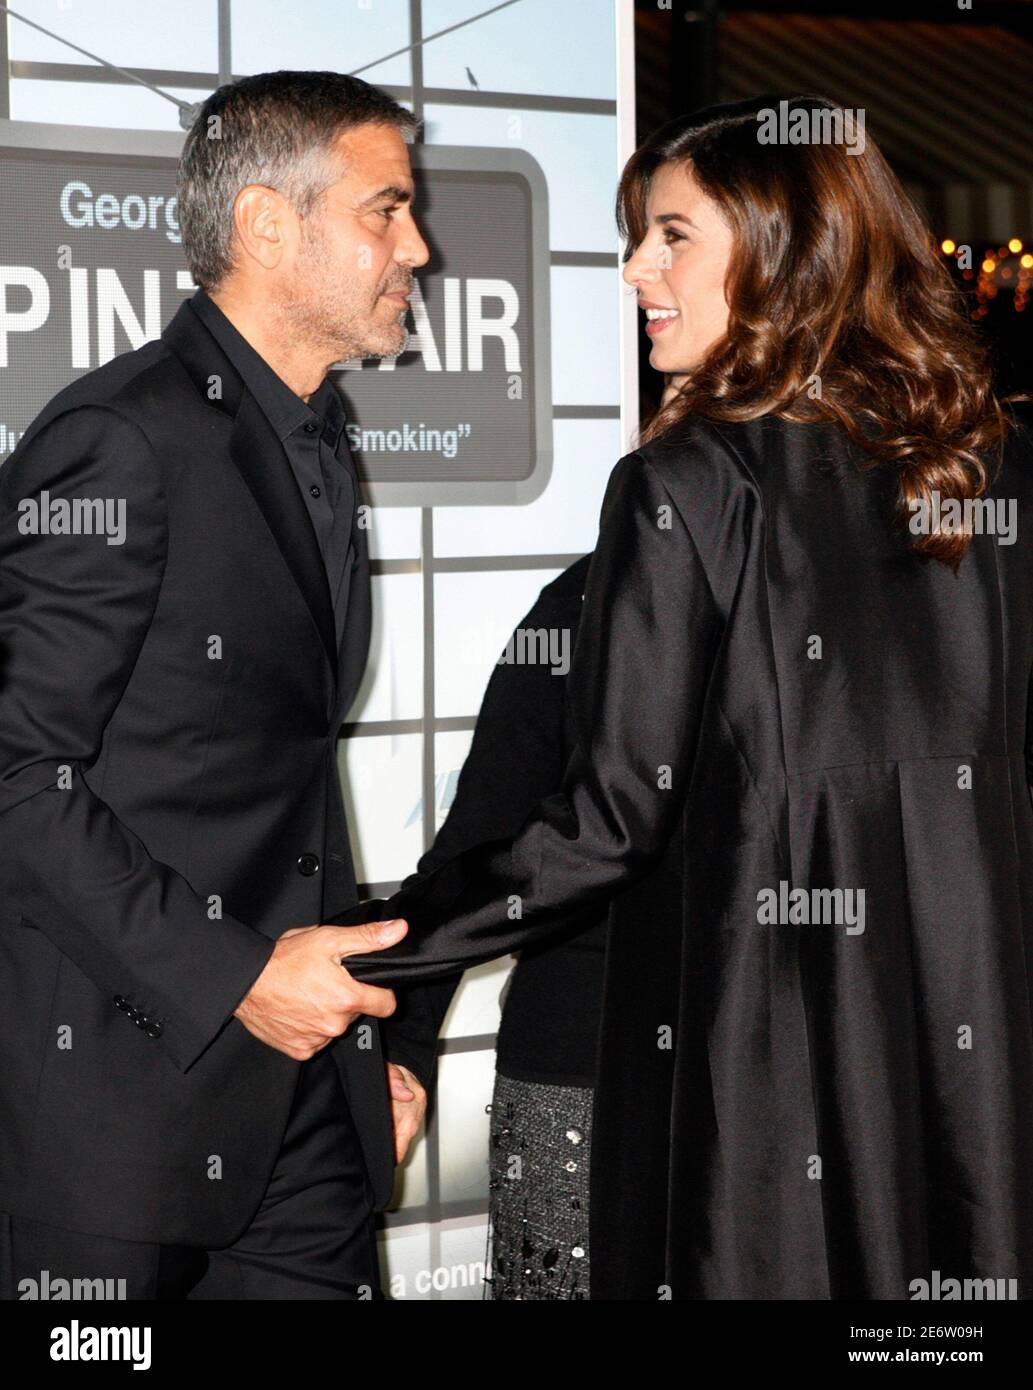 Actor George Clooney, star of the film 'Up In The Air', poses on the red carpet with girlfriend Elisabetta Canalis at the film's premiere in Los Angeles, California November 30, 2009. REUTERS/Fred Prouser    (UNITED STATES ENTERTAINMENT) Stock Photo